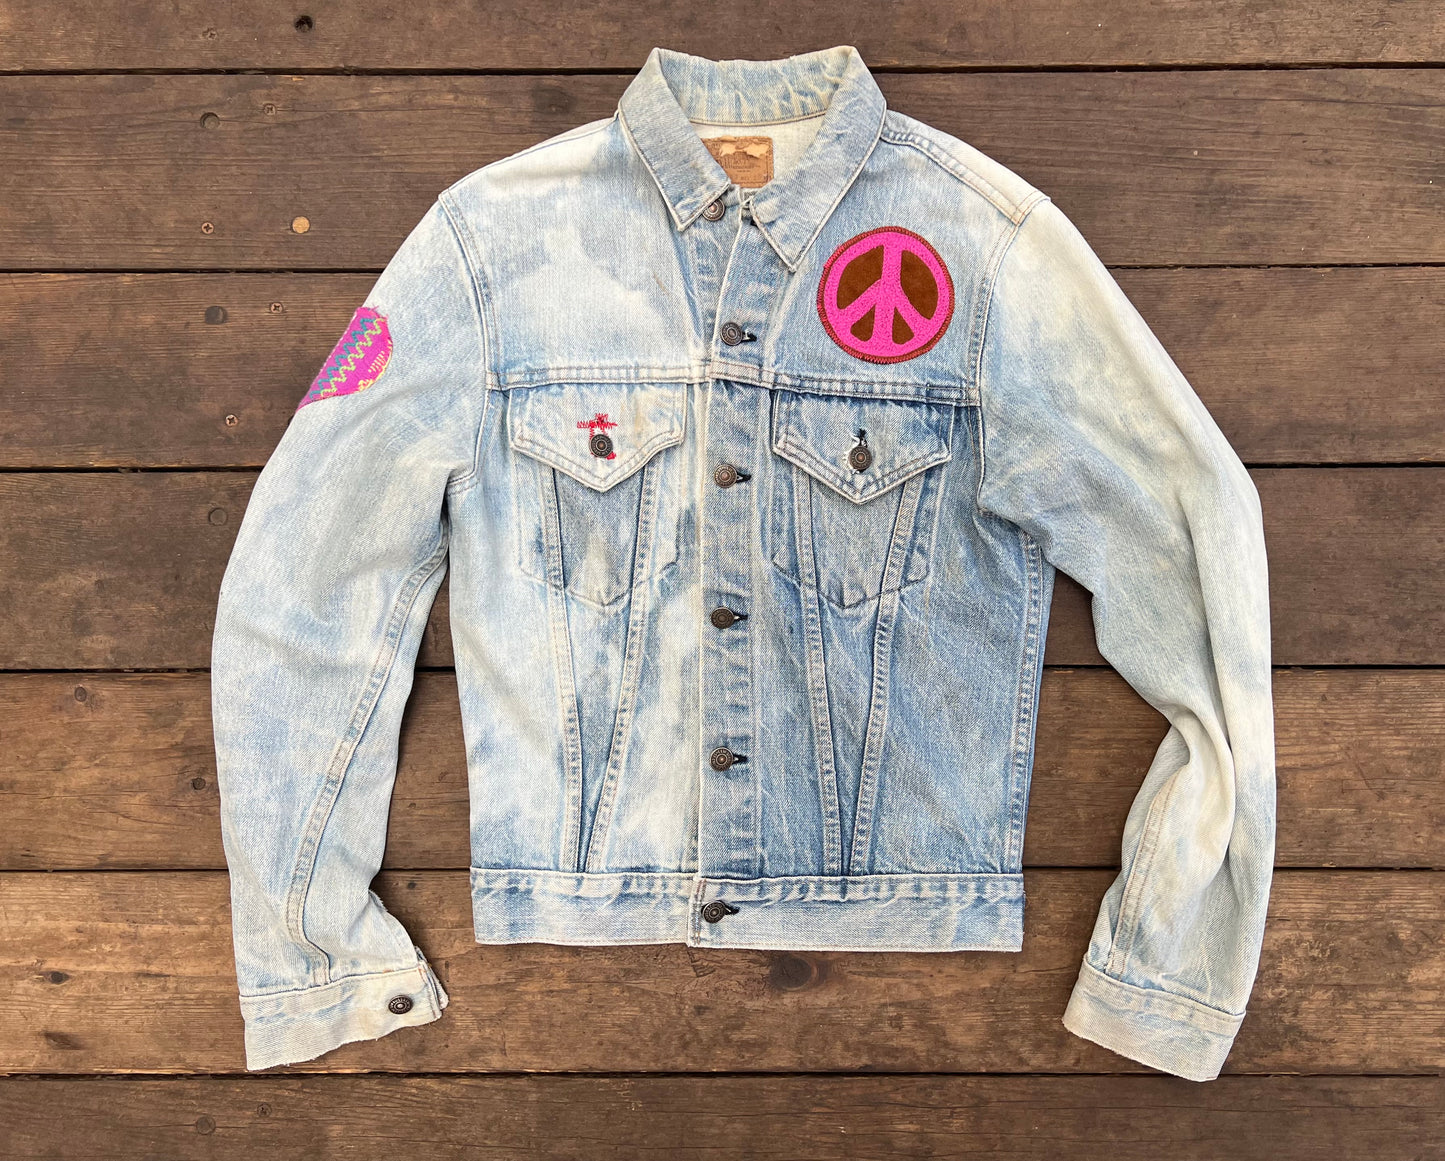 "One of a Kind" Levis Denim Jacket with Chainstitch Embroidery and Leather Stars and patches.